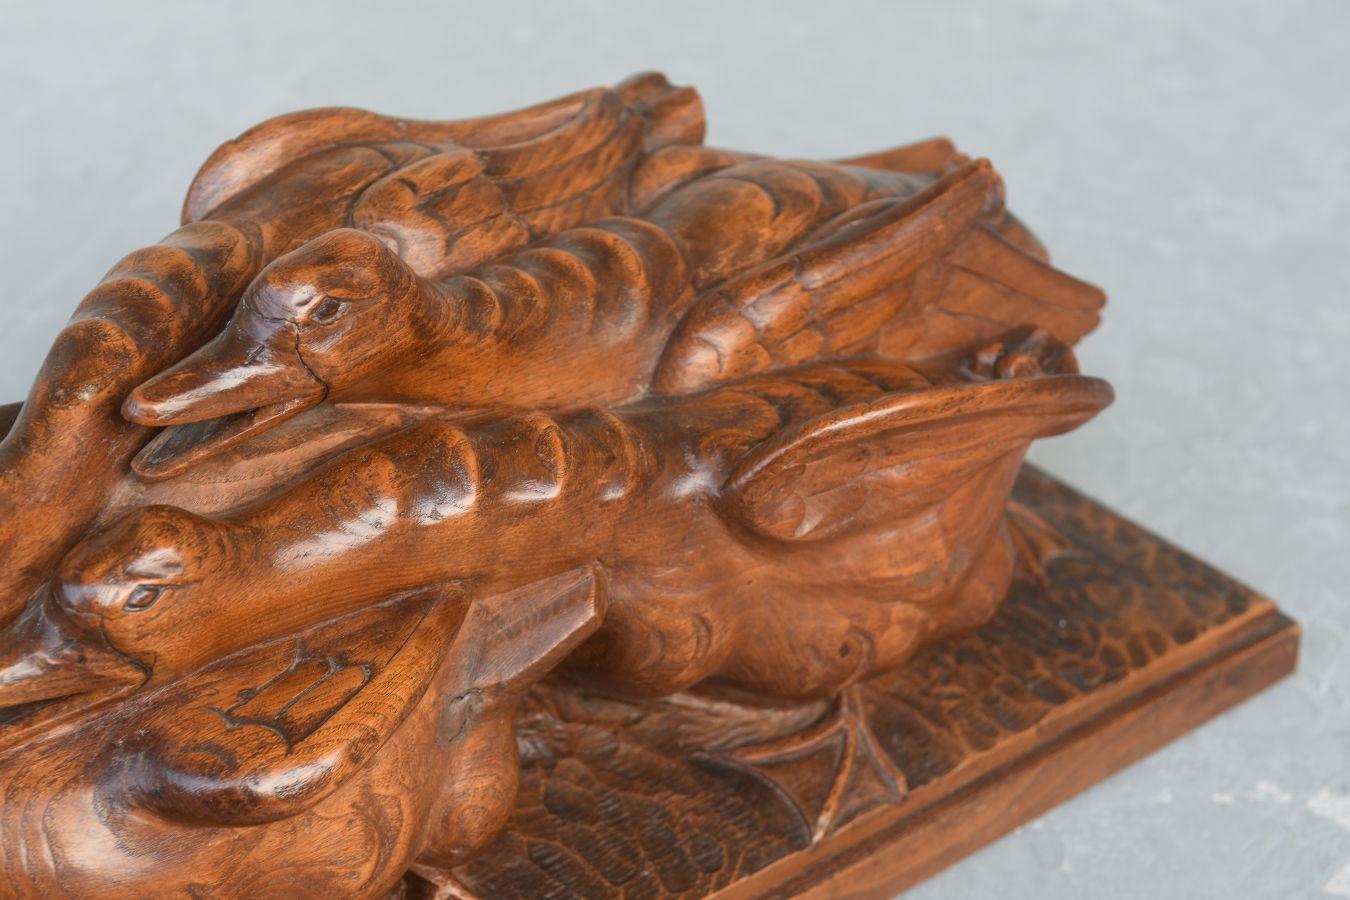 1930 Geese Fighting Over a Frog by H. Petrilly Art Deco Wooden Sculpture For Sale 1